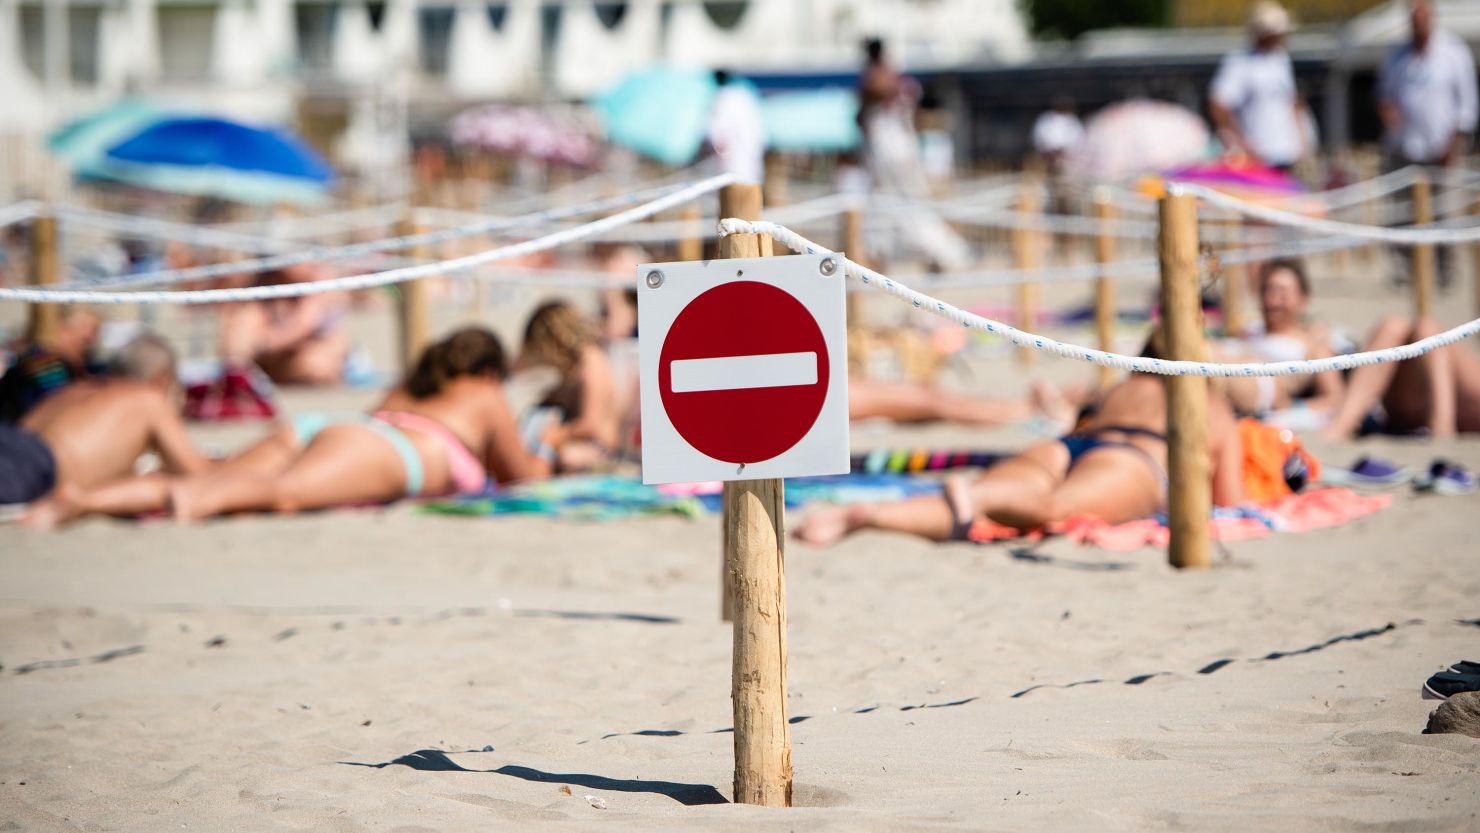 Rules on topless and nude sunbathing vary throughout France.